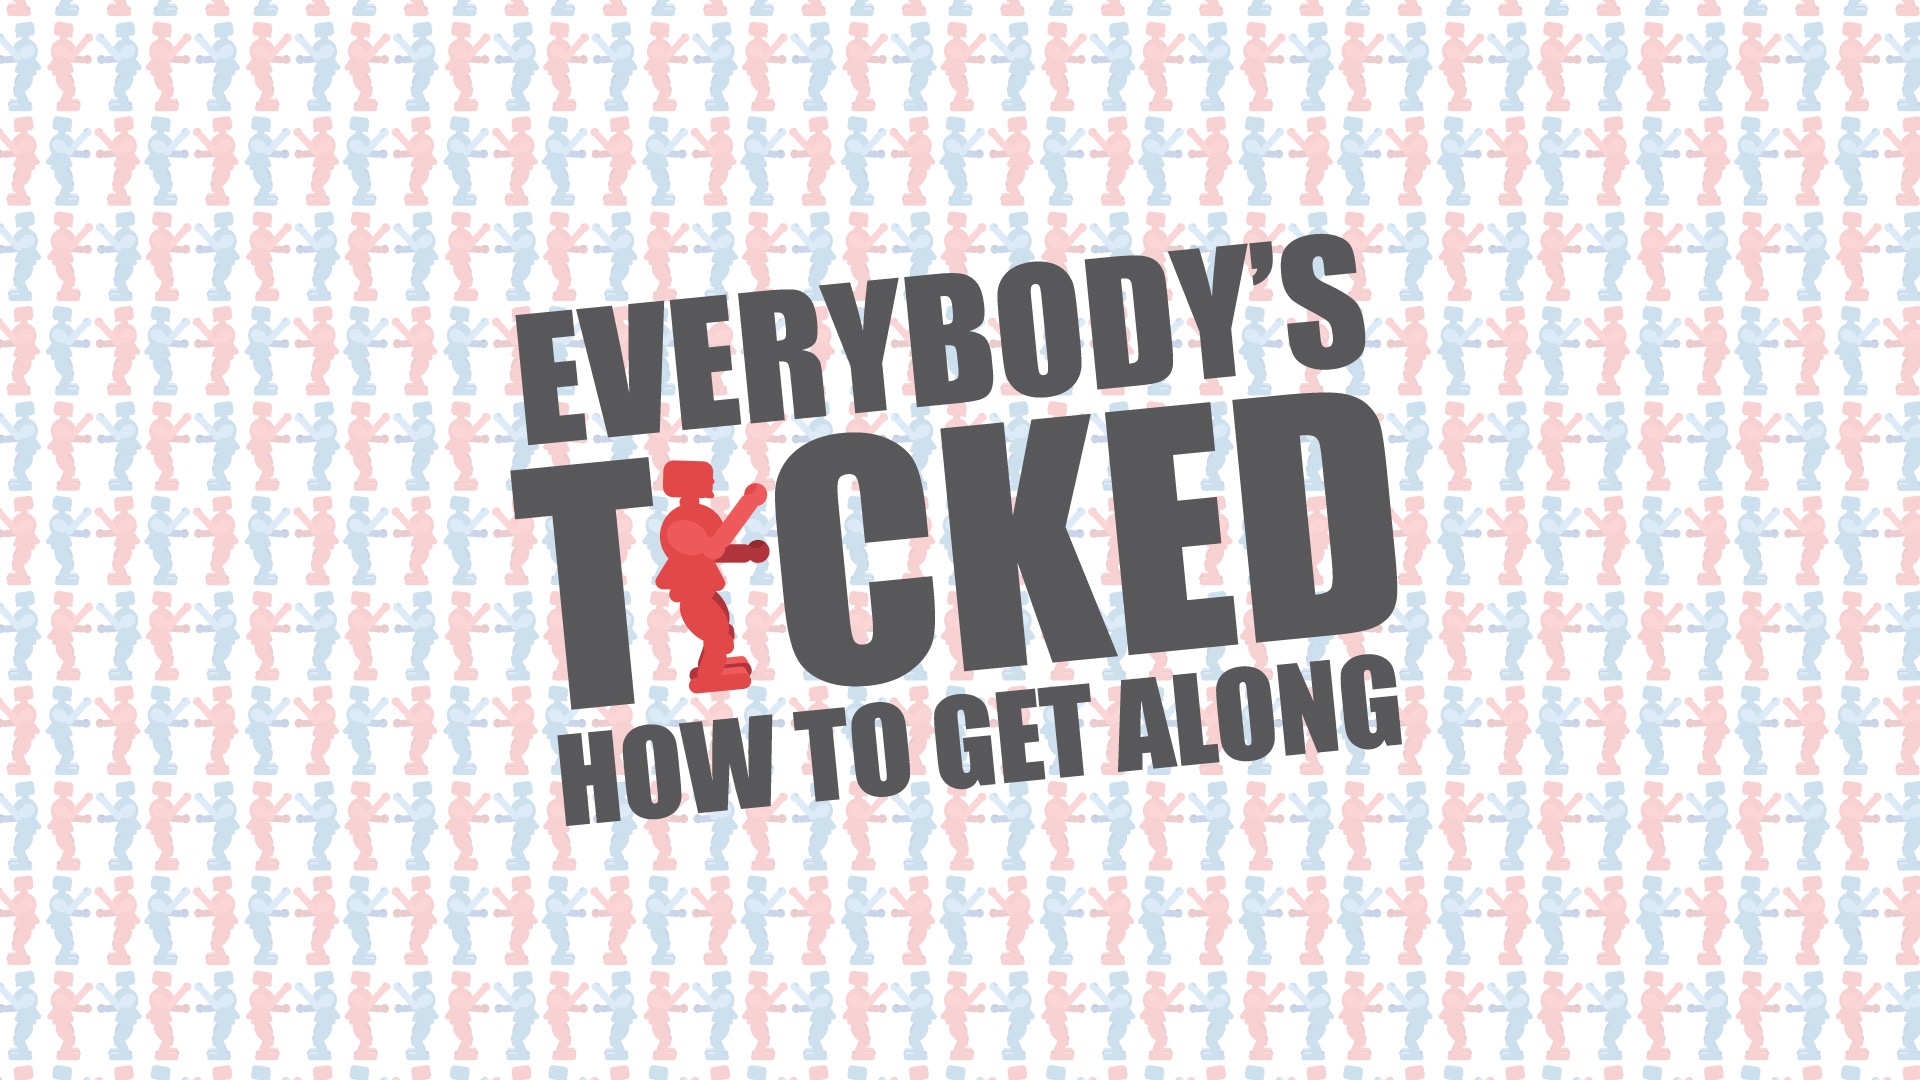 Everybody's Ticked: How To Get Along - Part VIII